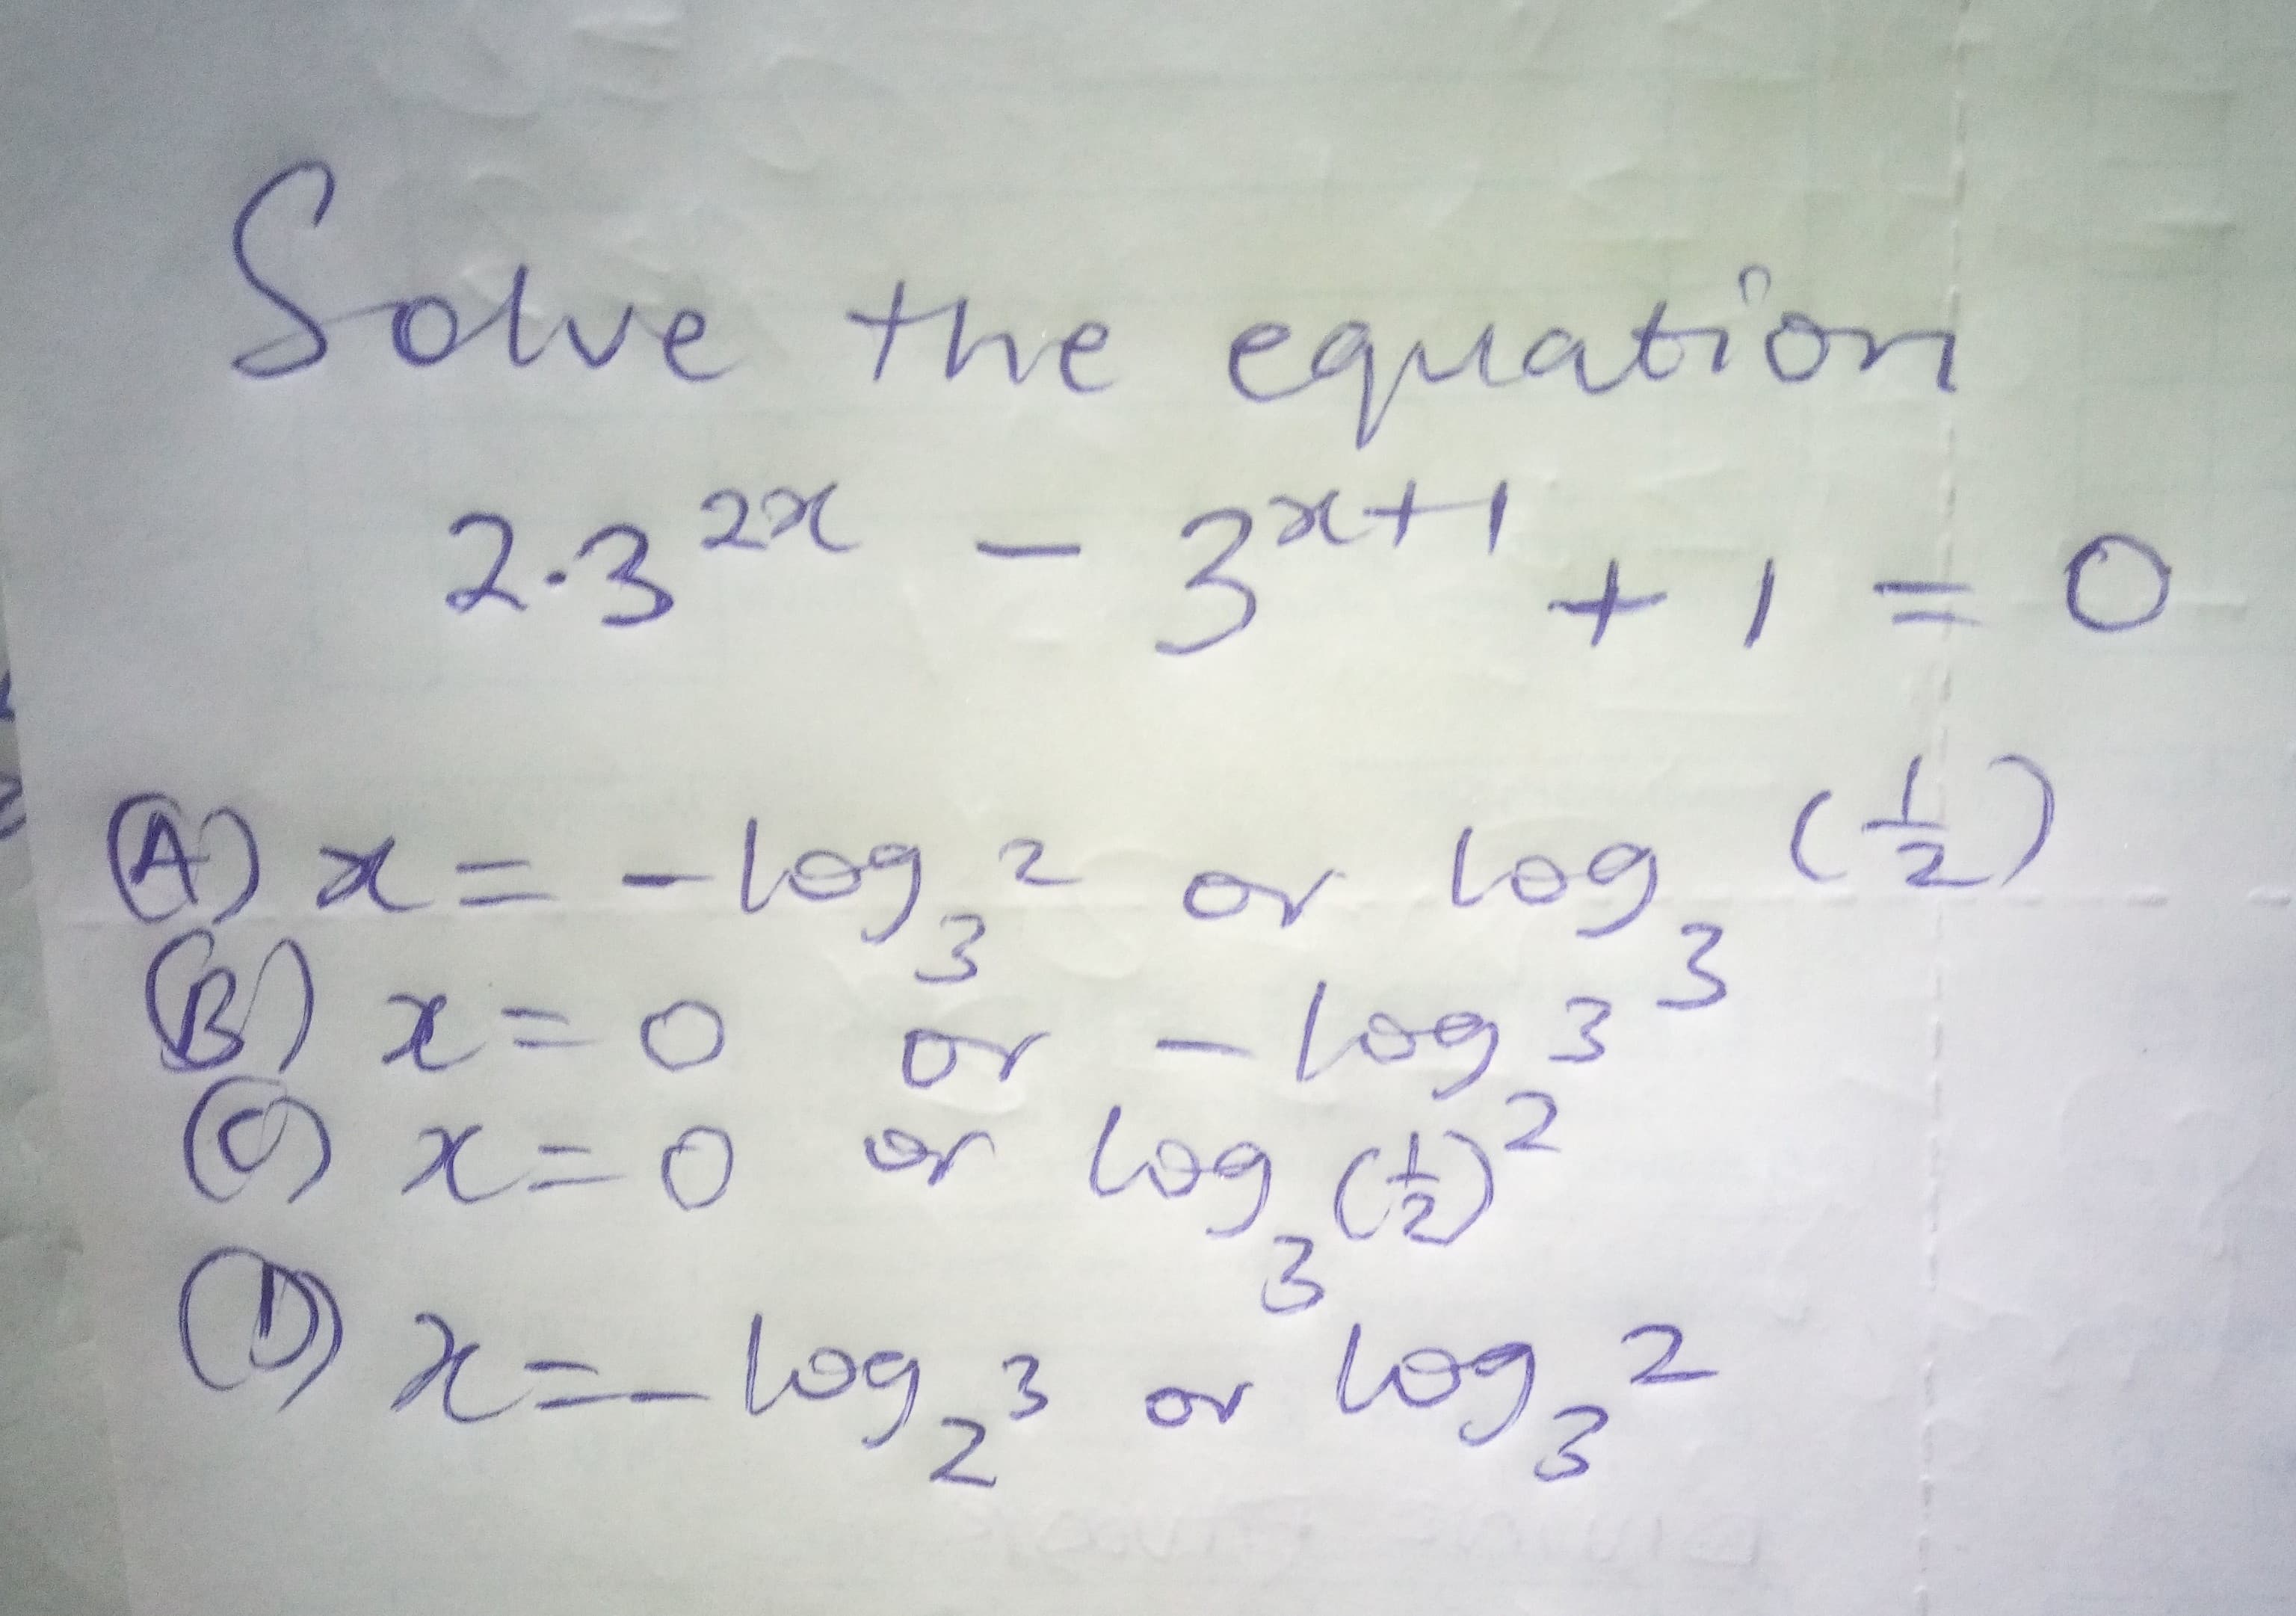 Solve
the equation
2.3 2%
3 +1 = 0
